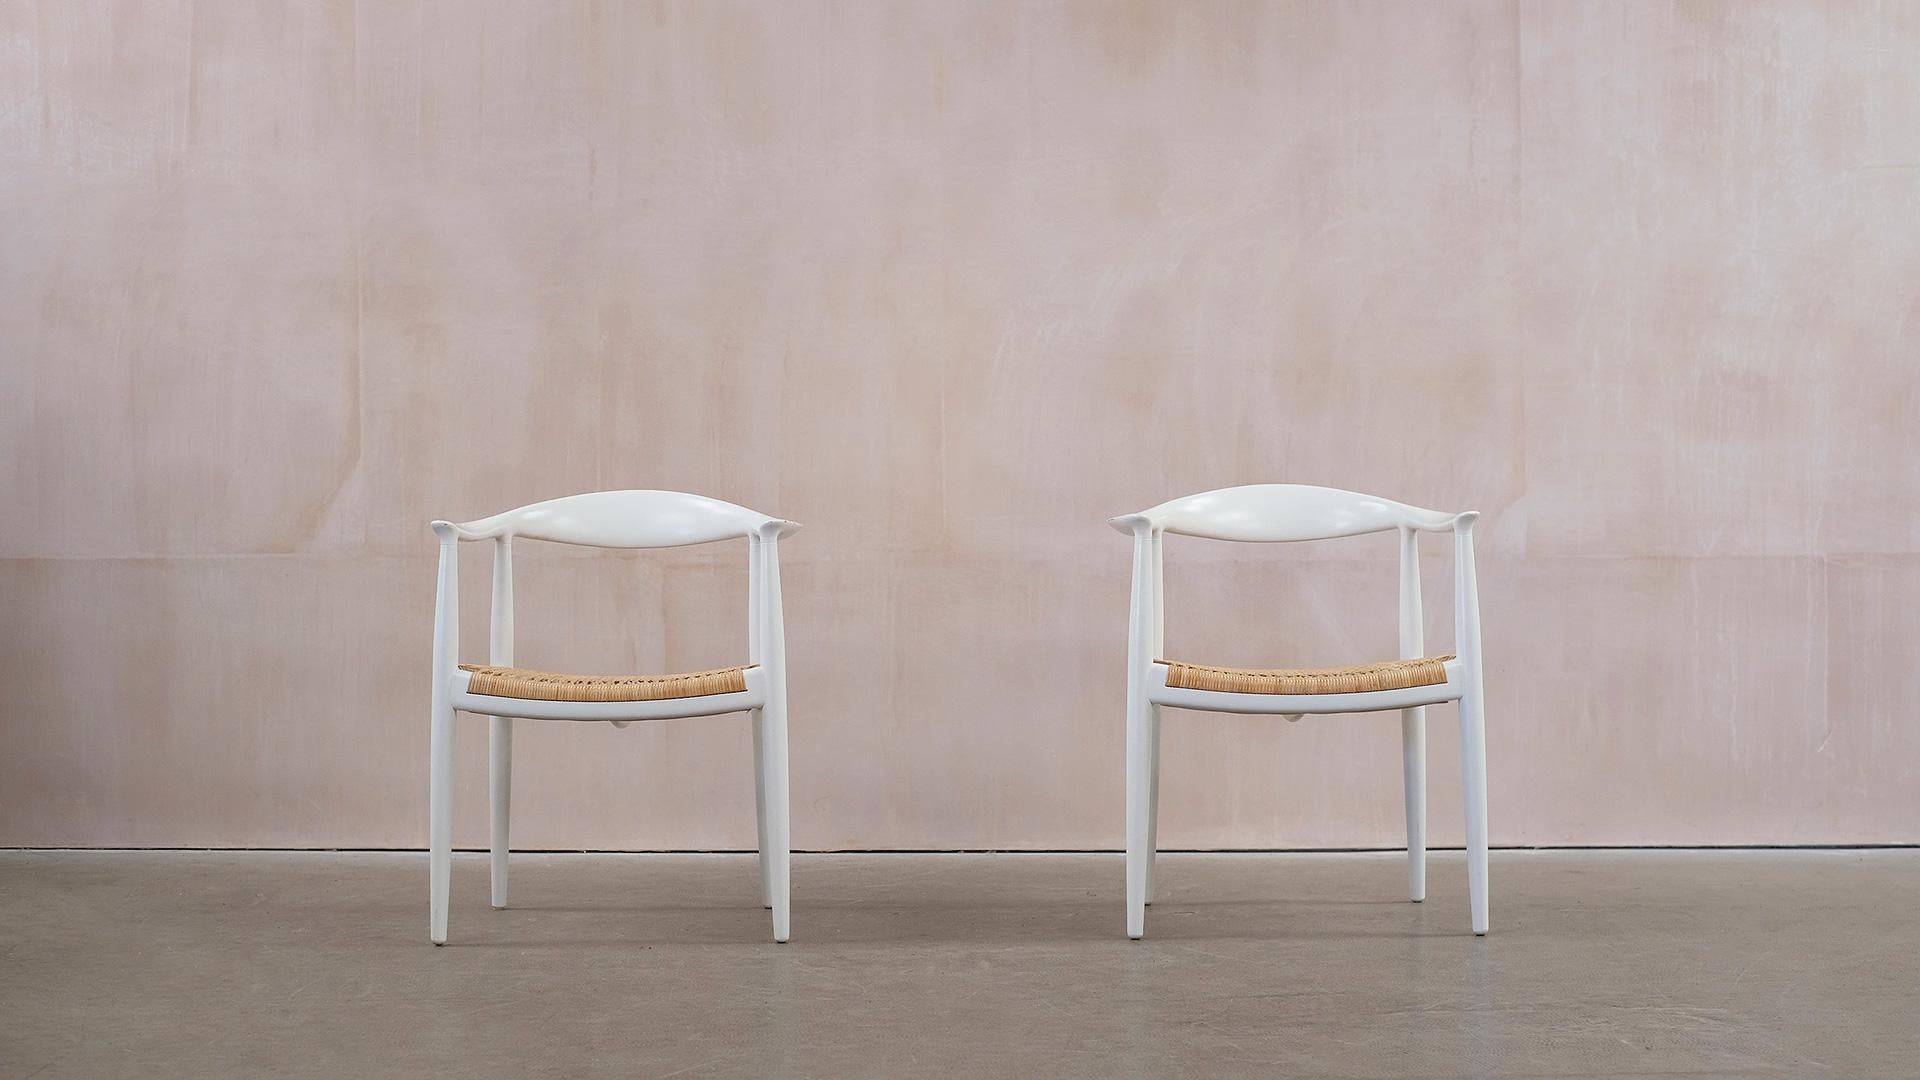 Amazing pair of Hans Wegner Round Chairs PP 501 in ‘Special Request’ white pigment lacquer finish. These chairs were ordered from PP Mobler in 2015 with clearance from the Wegner estate for the custom finish and as such are unusual and beautiful.